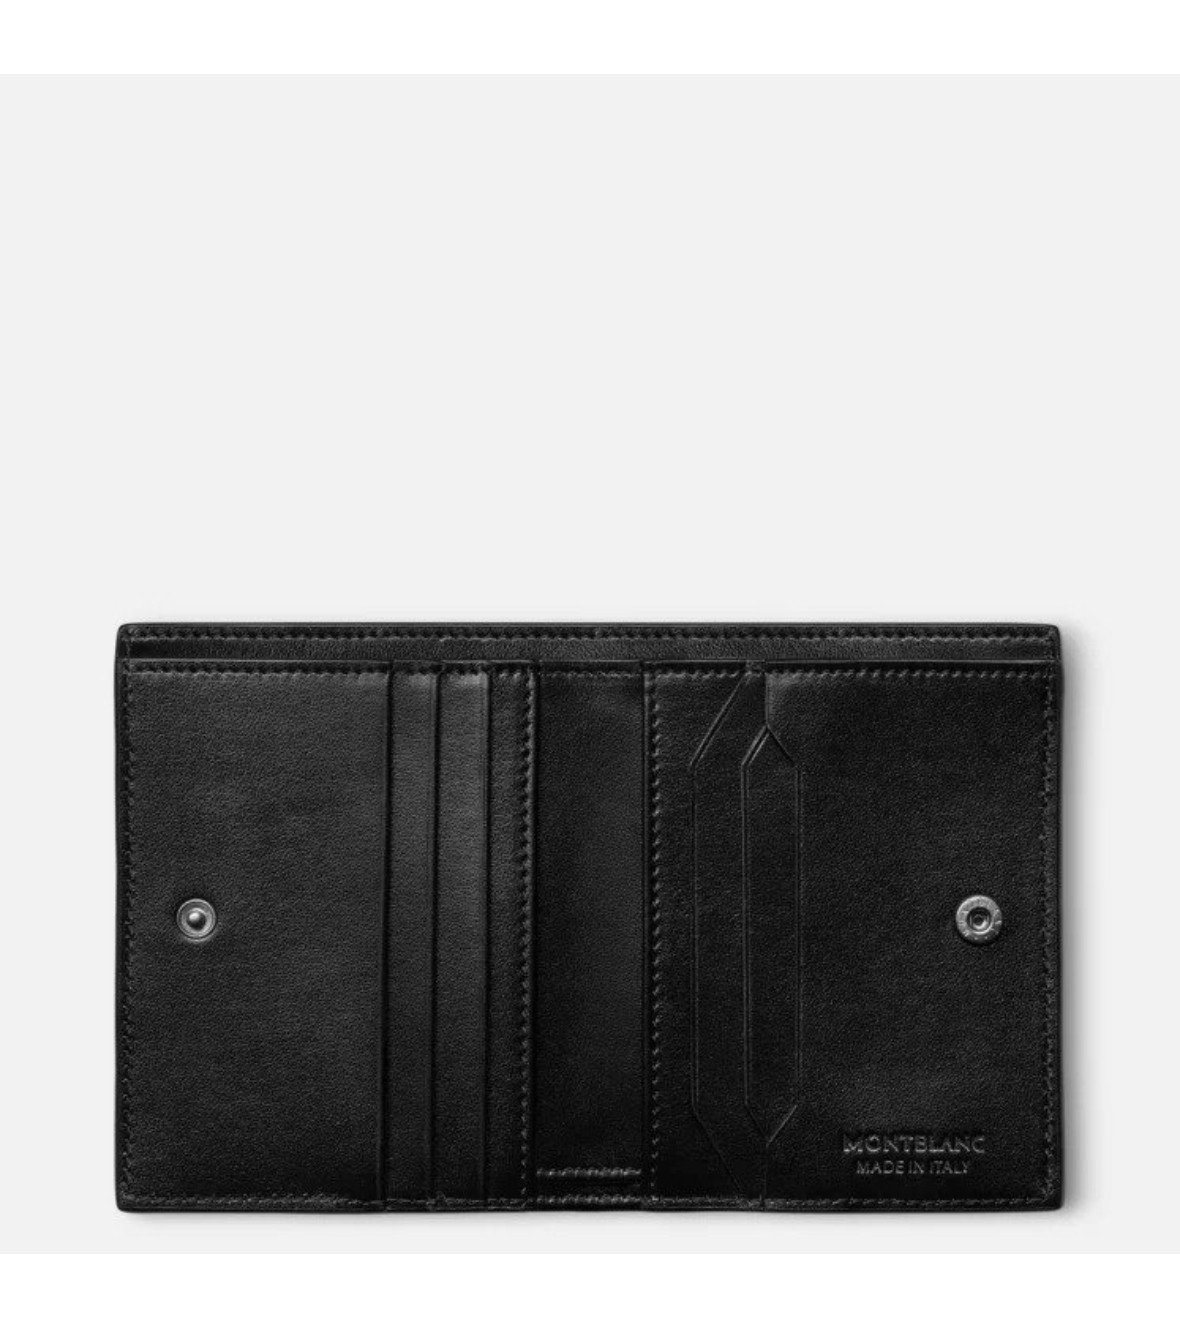 Montblanc Extreme 3.0 compact wallet 6cc 129986